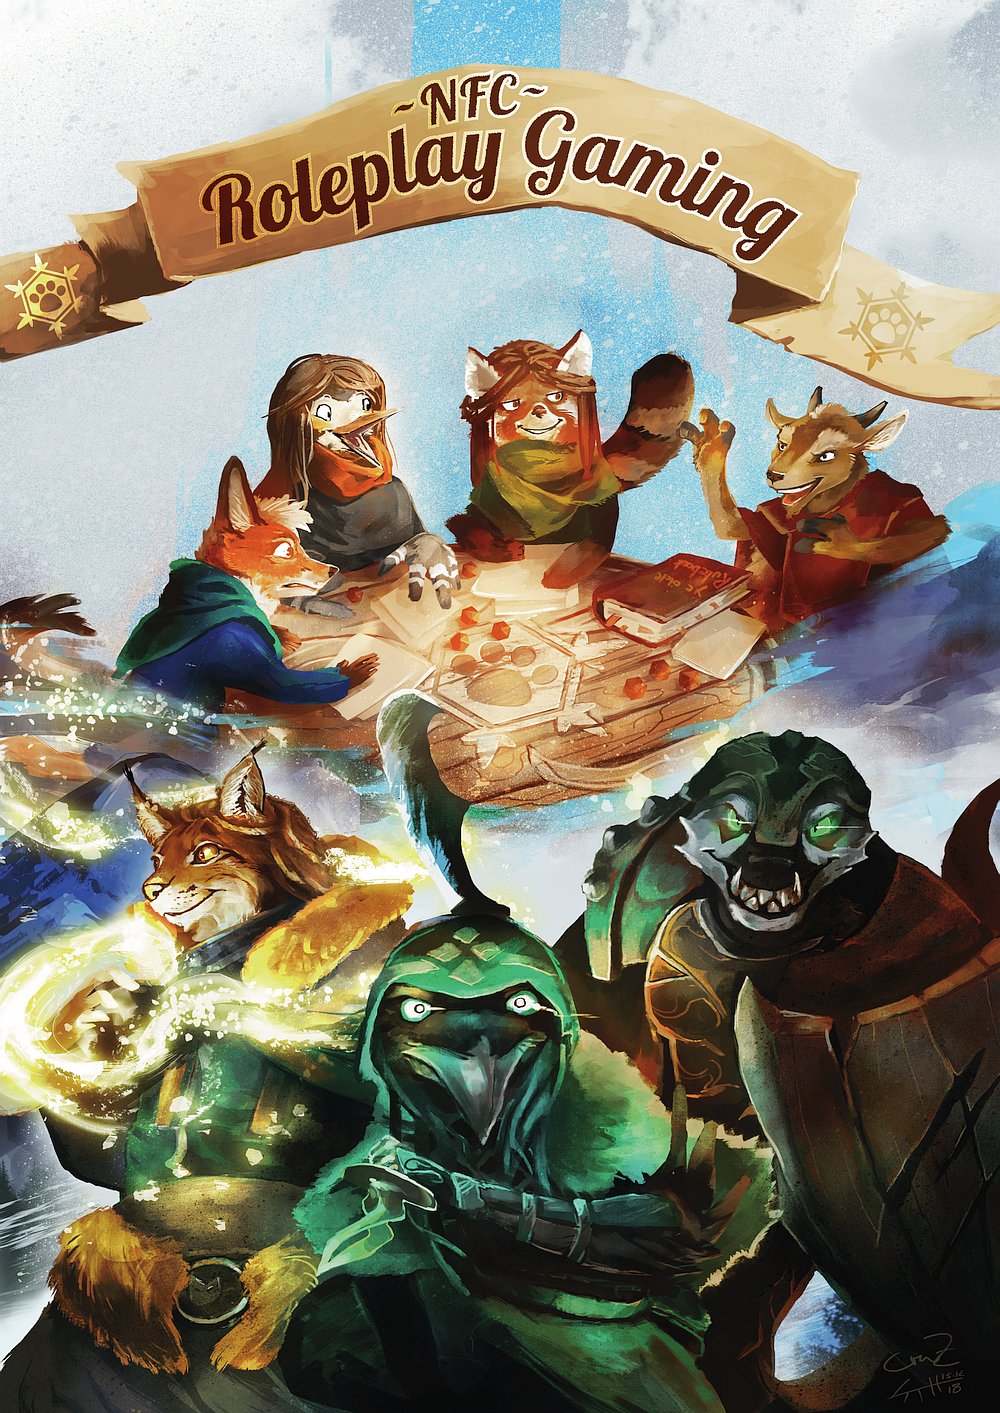 A poster for NFC's role playing games